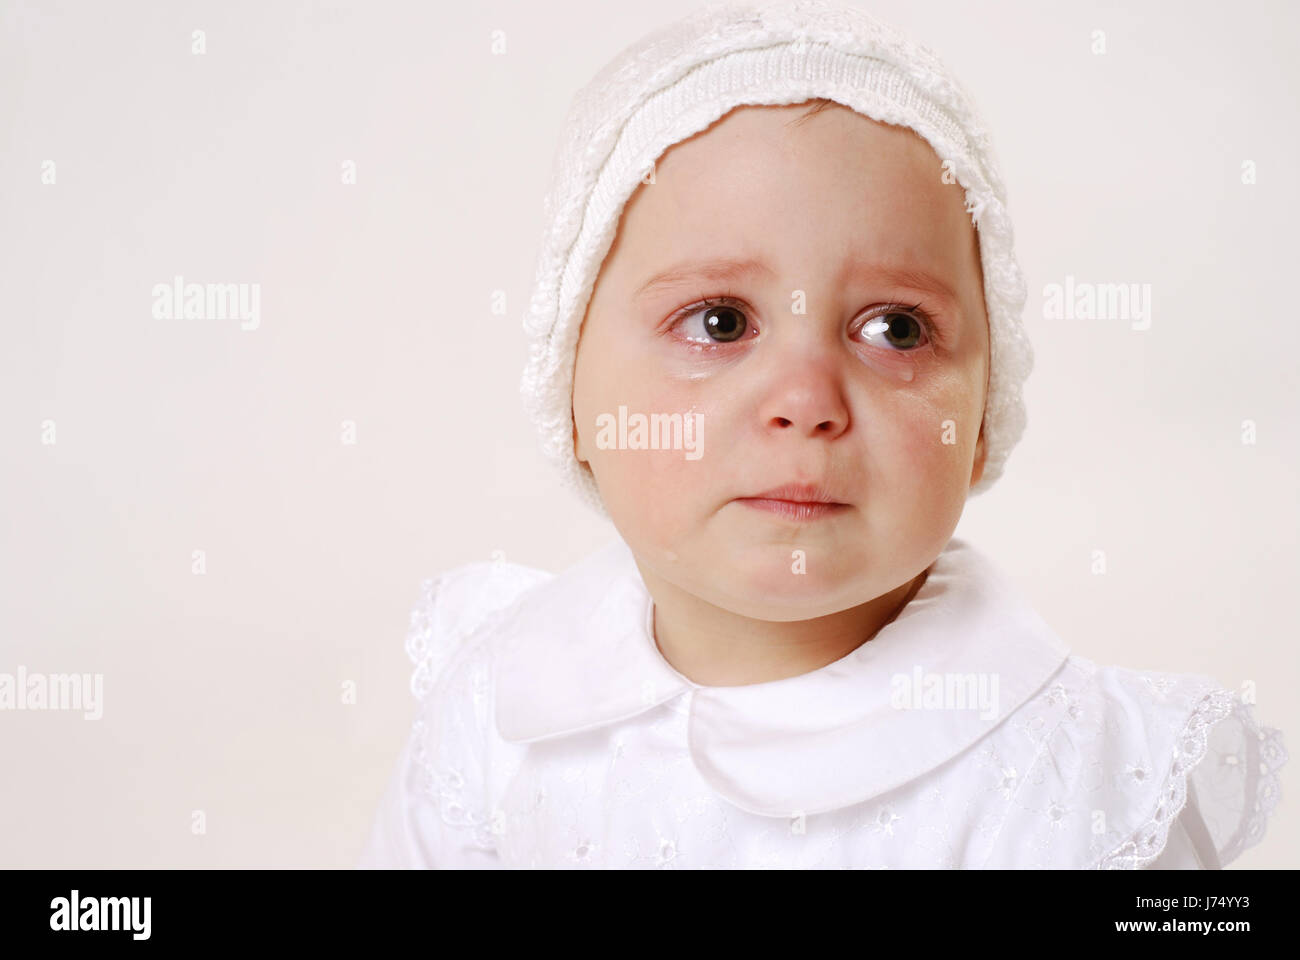 sad weep cry crying weeper weeping child girl girls toddler teardrop tear Stock Photo